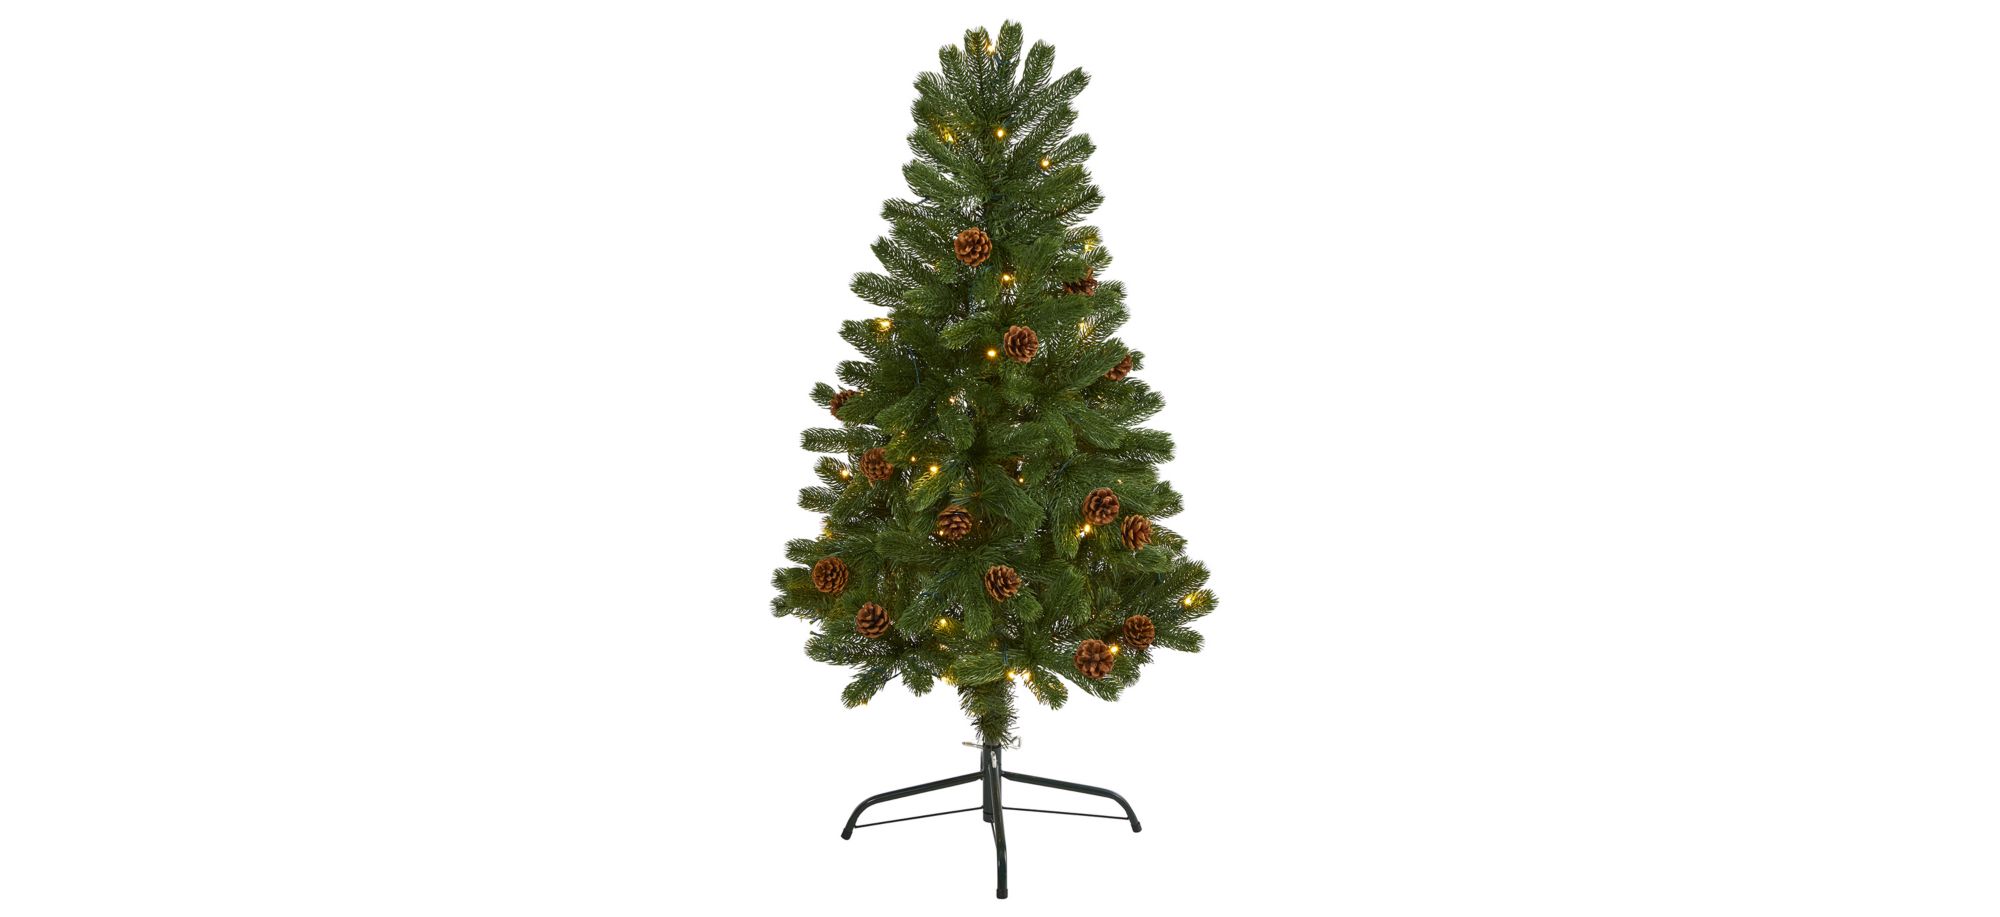 4ft. Pre-Lit Rocky Mountain Spruce Artificial Christmas Tree in Green by Bellanest